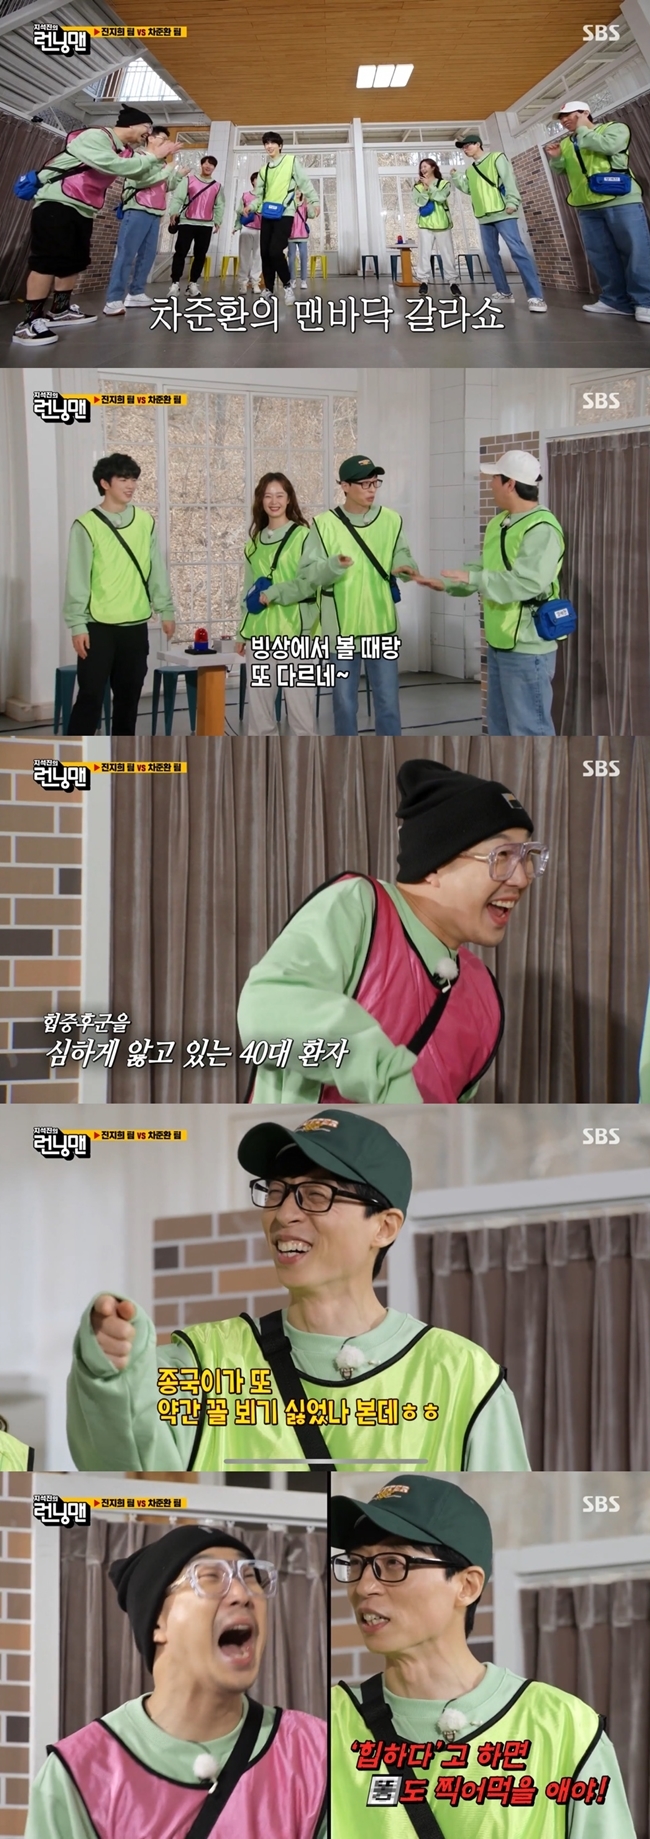 Yoo Jae-Suk reveals Hahas hip loveOn March 13, SBS Running Man, Cha Jun-hwan and Jin Ji-hee appeared as guests and were decorated with team leader Race.In front of the full-scale race, Cha Jun-hwan boasted a high-quality dance ability to the music, and Yoo Jae-Suk said, Cha Jun-hwan is cute. It is different from when he is on the ice.Jin Ji-hee also expressed confidence that he would show dance.While Jin Ji-hee was away for a while to play music, Haha followed the dance of Cha Jun-hwan and shuddered.When Kim Jong Kook disapproved of this, Yoo Jae-Suk laughed at Haha, saying, Its crazy. If you say its hip, youll eat your stool.